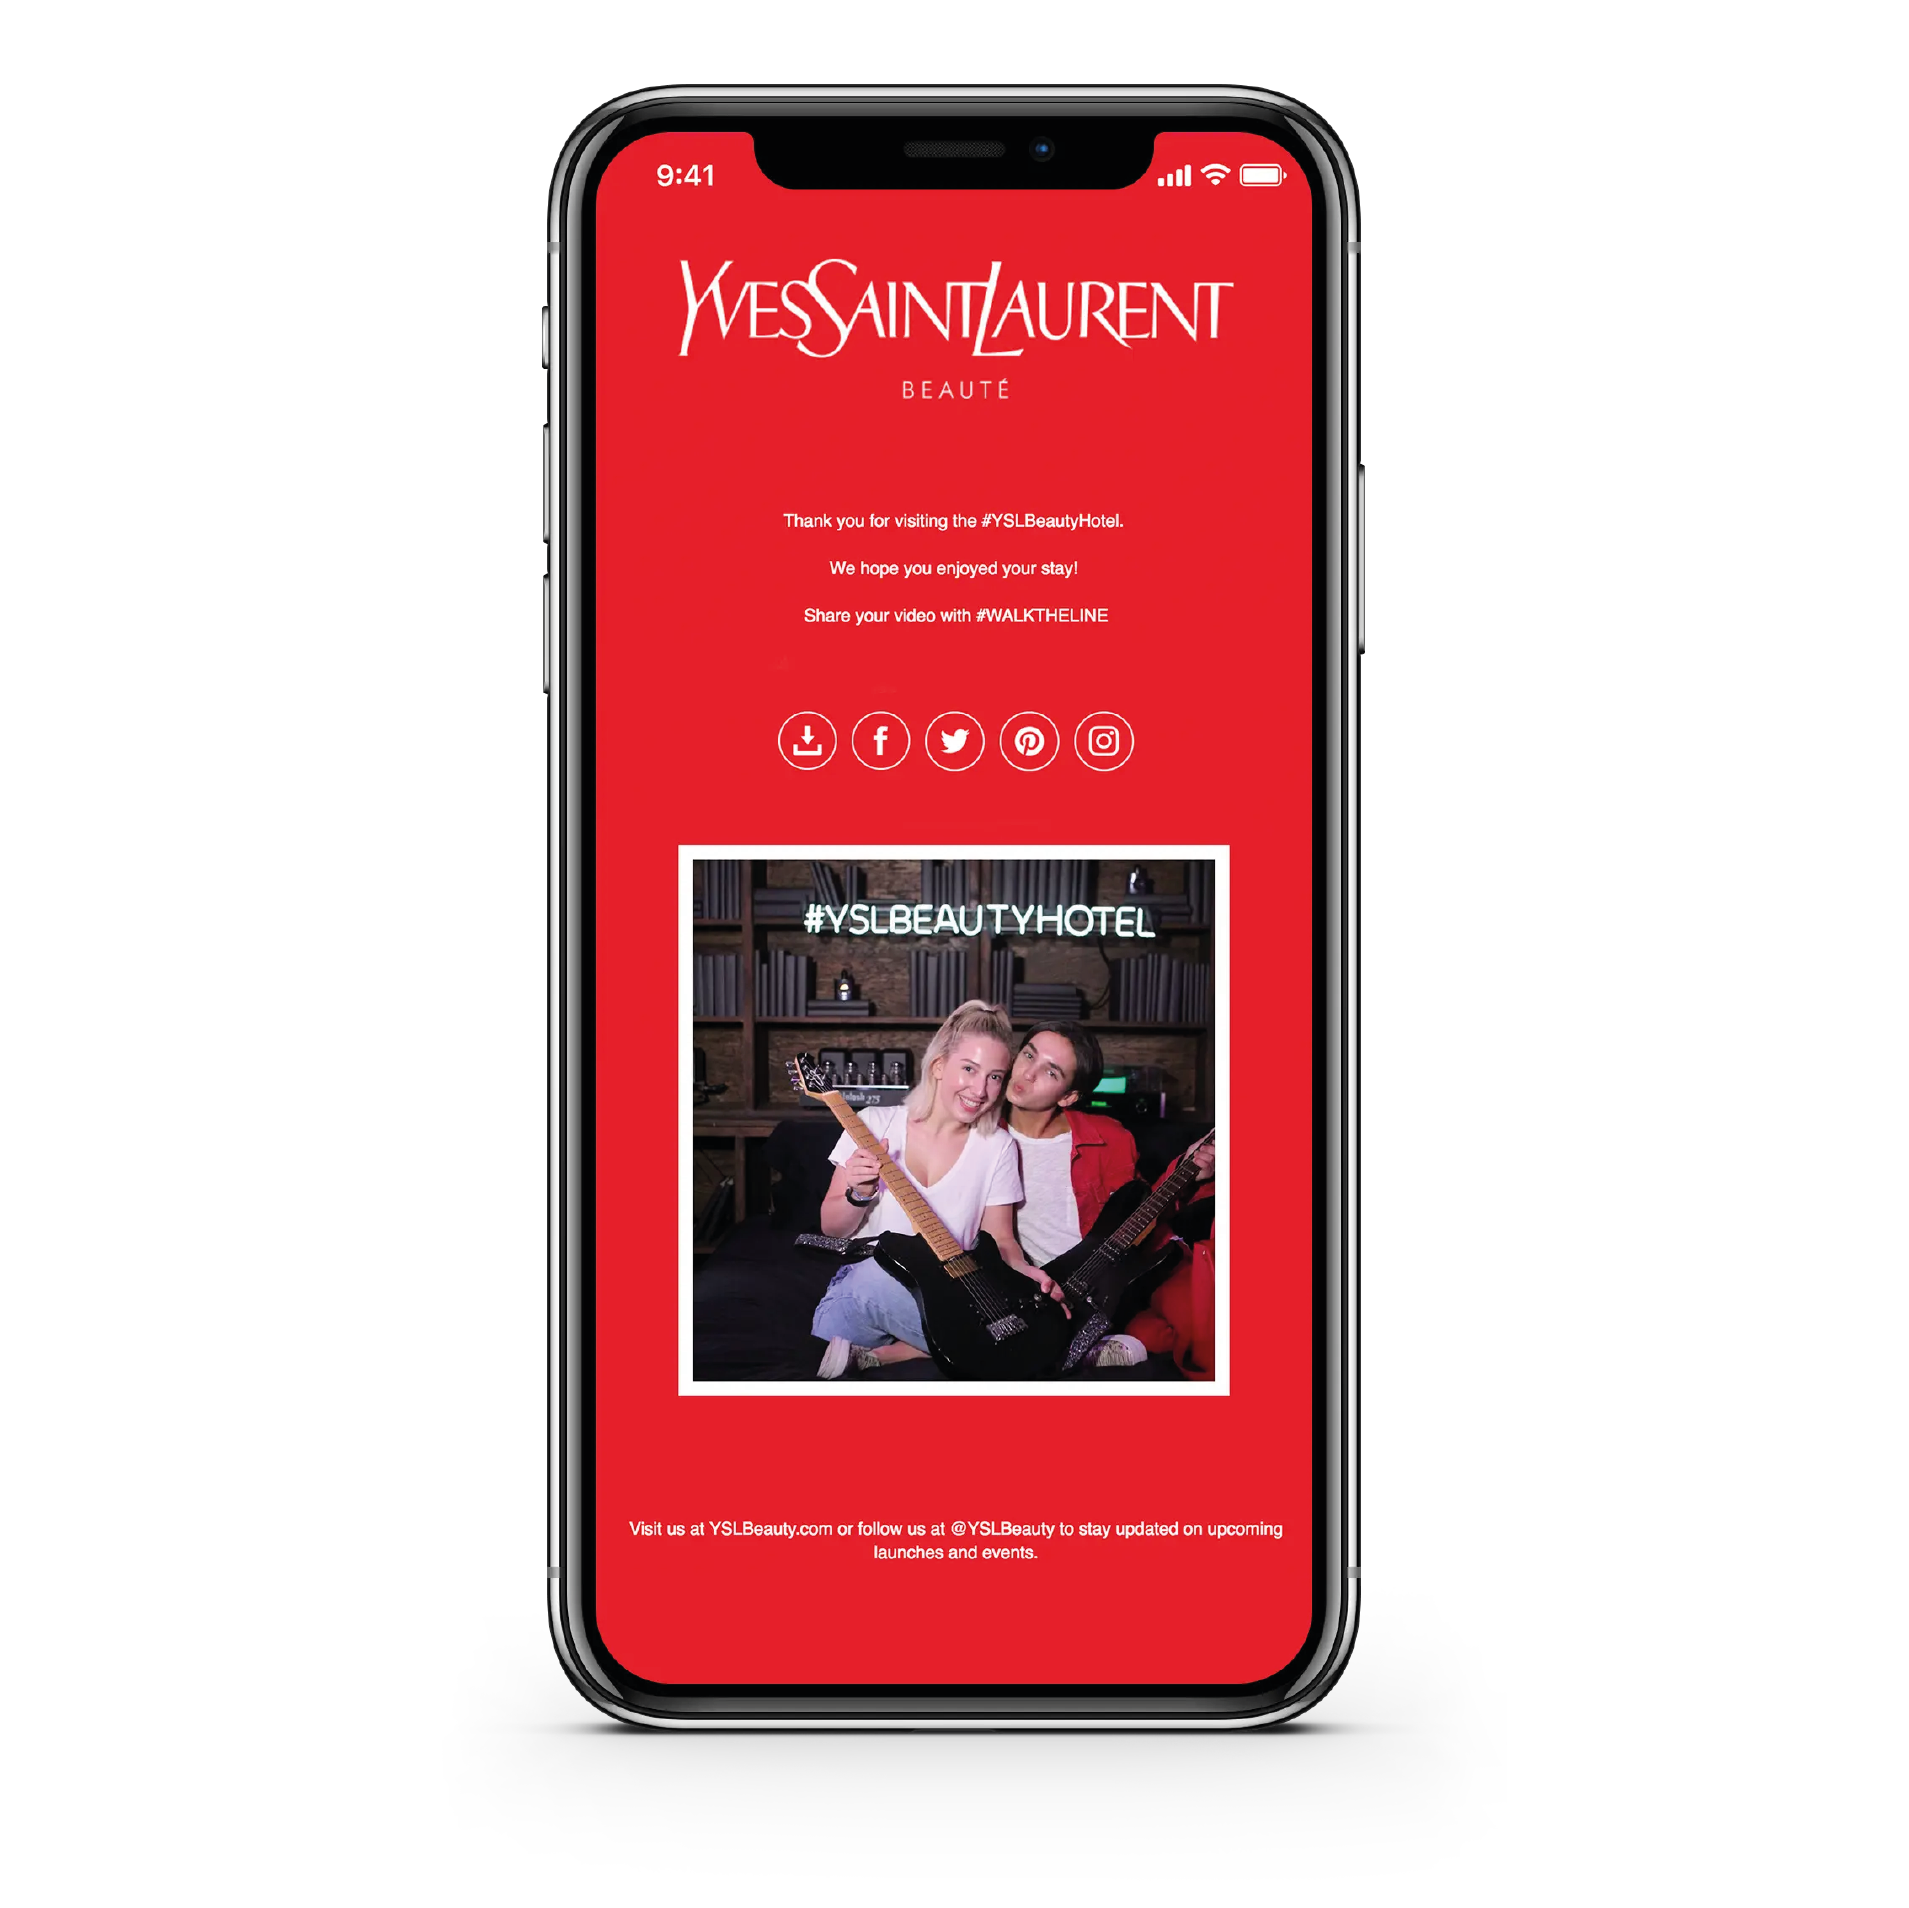 Custom email sending Yves Saint-Laurent. A smartphone screen showing a personalized photo taken at an event, ready for social sharing Yves saint laurent